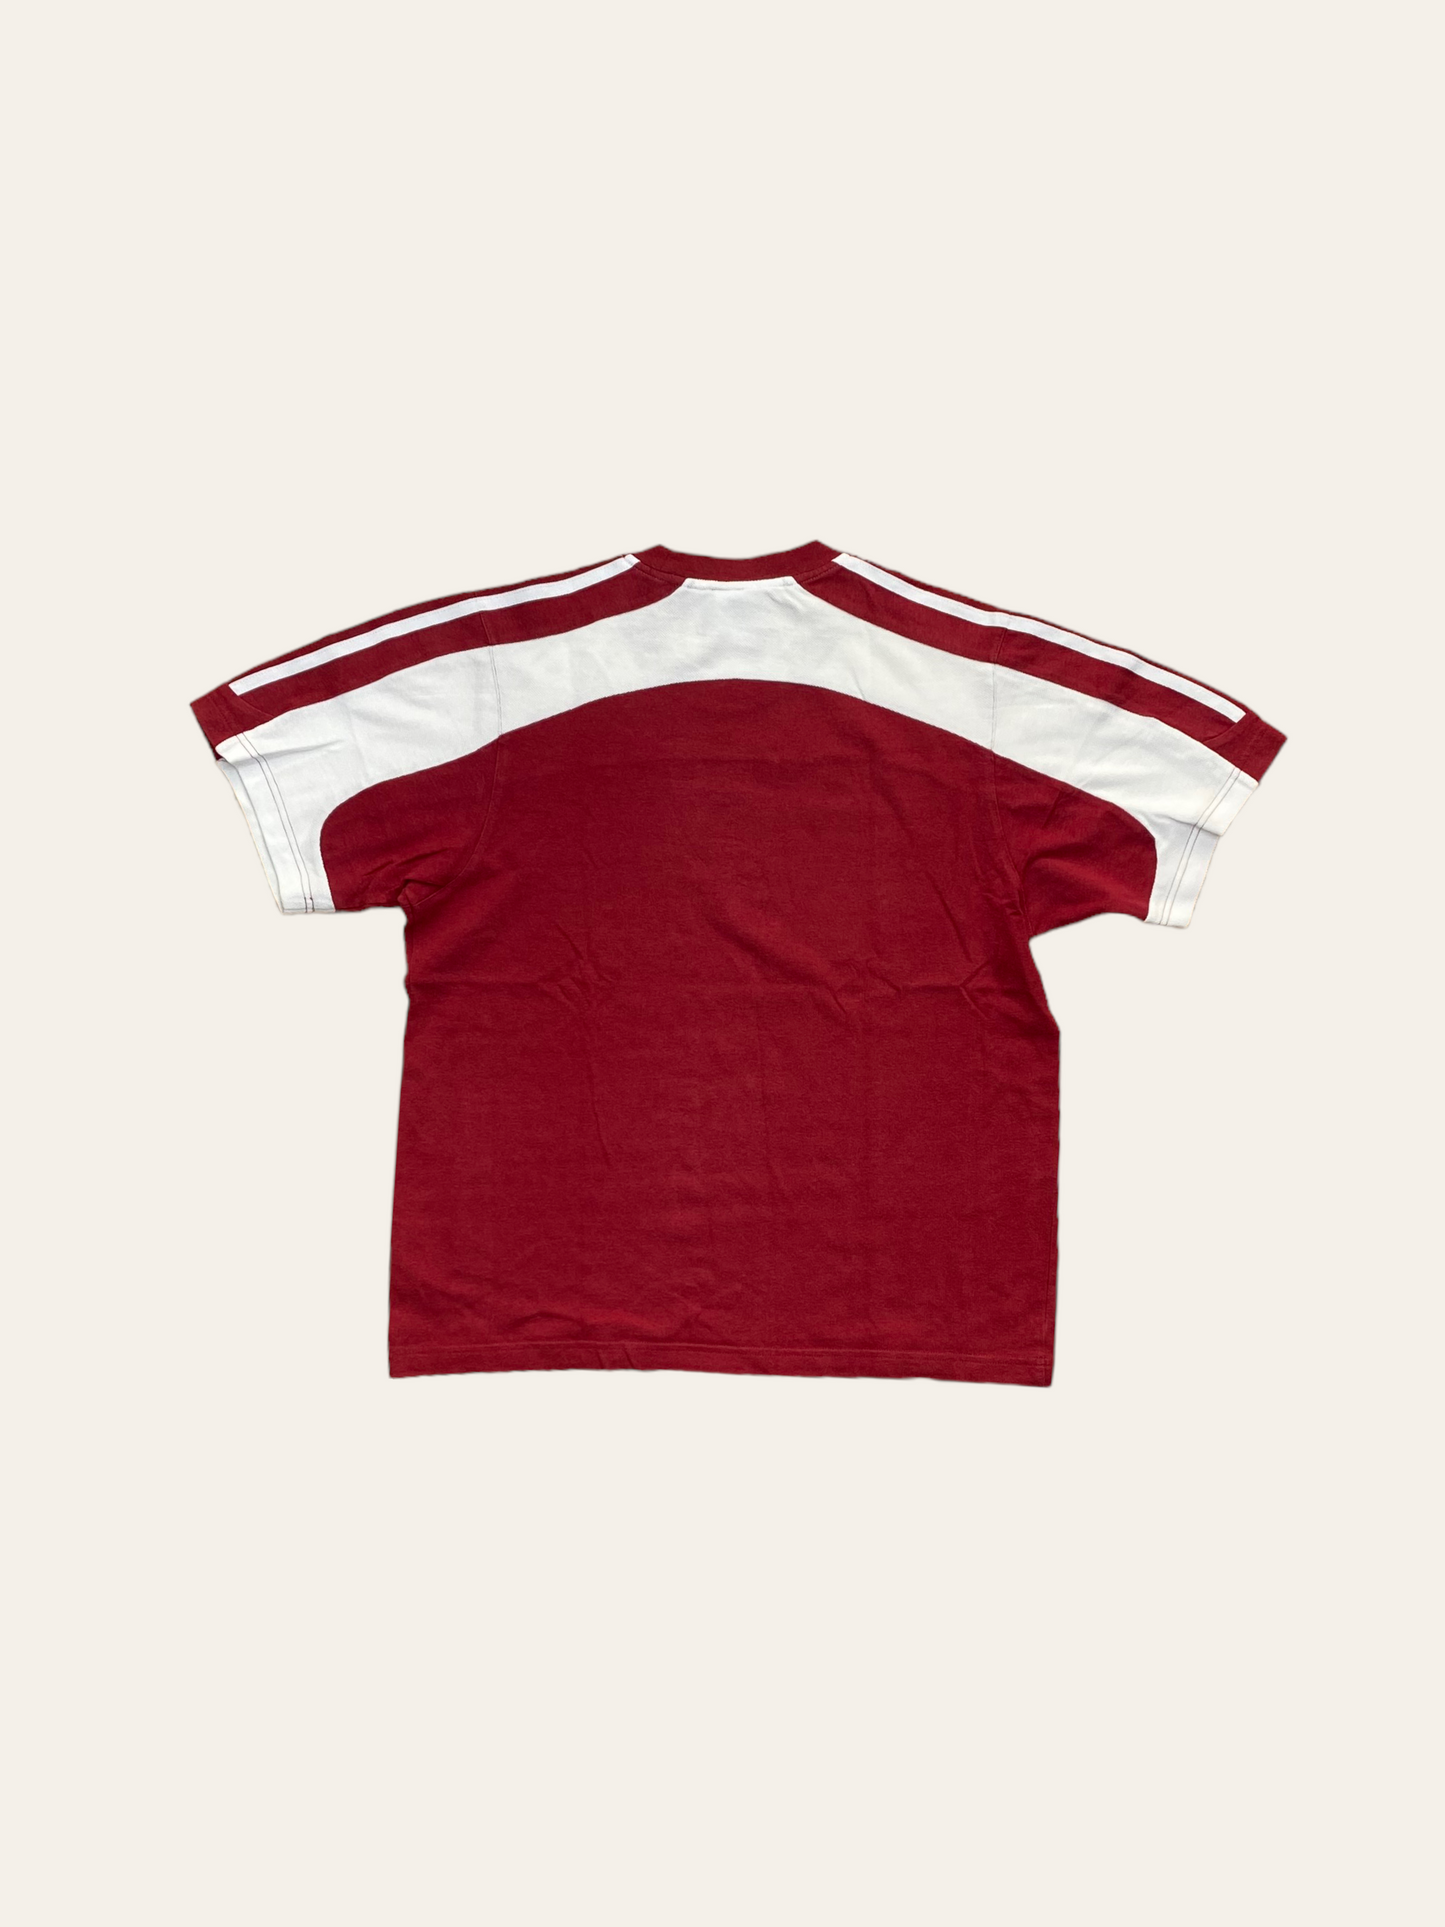 VINTAGE SHORT SLEEVE TEE ADIDAS RED AND WHITE - S